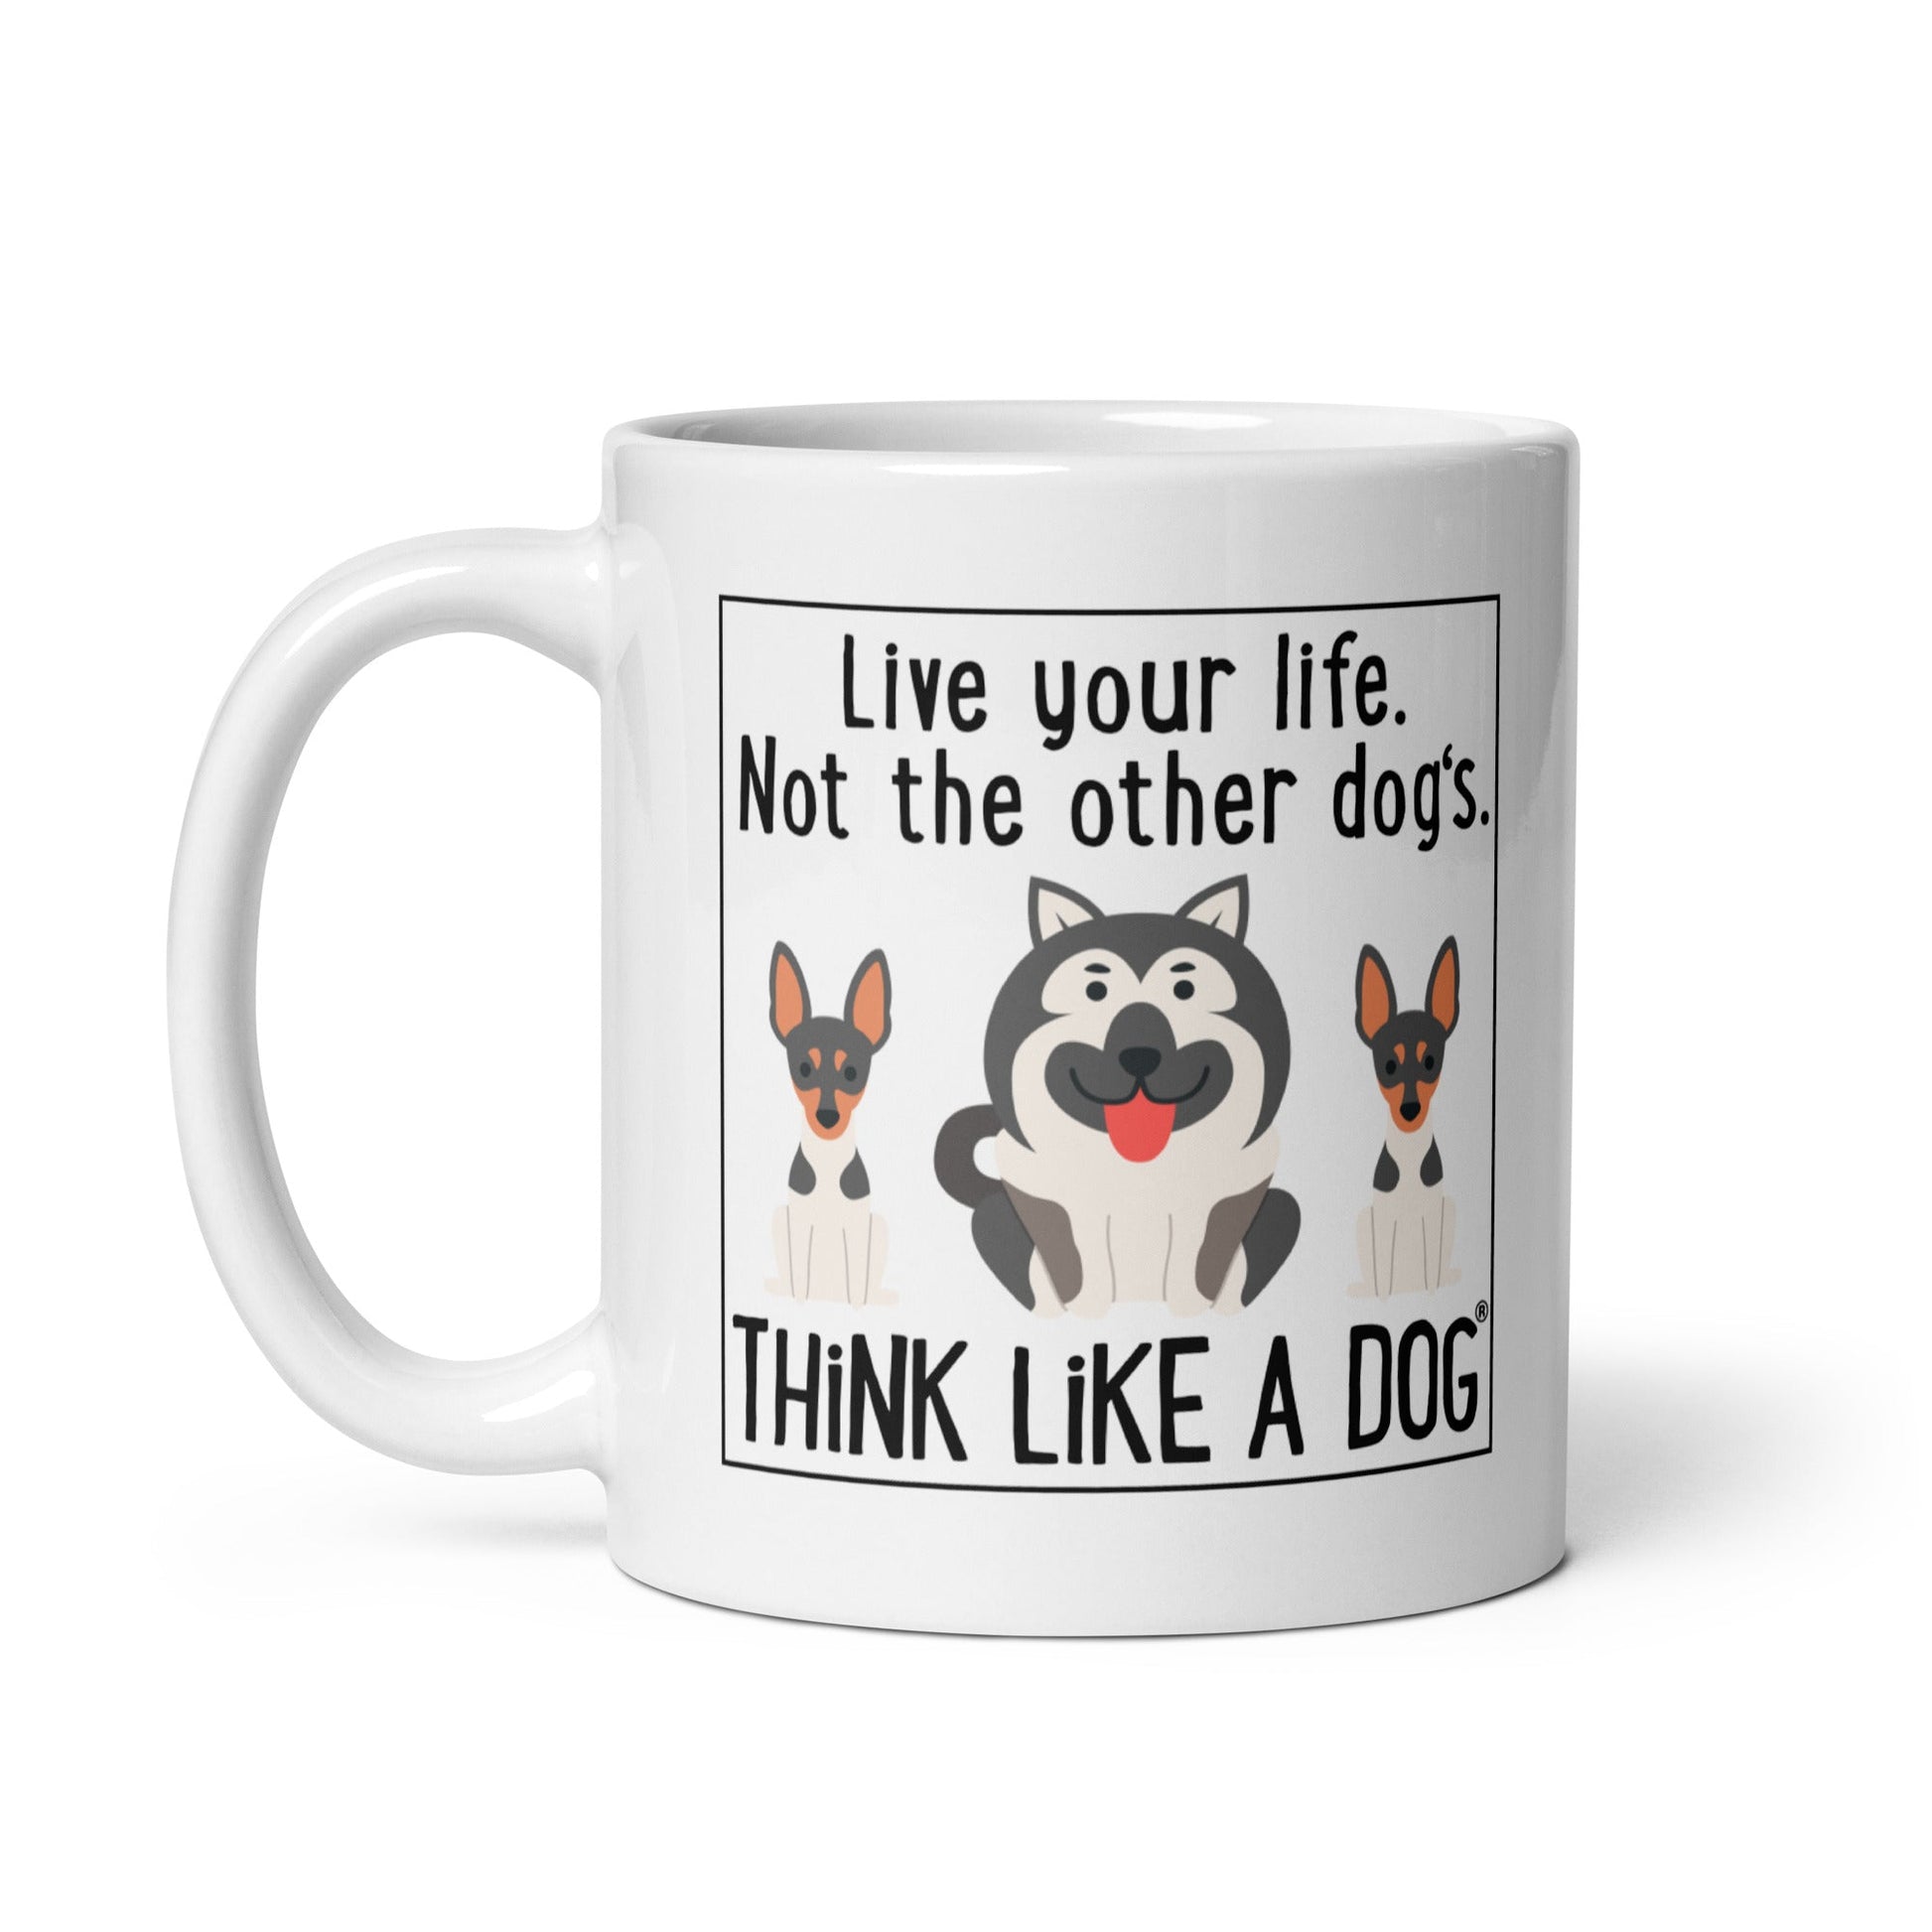 THiNK LiKE A DOG® White glossy mug with the phrase "live your life, not the other dog's. think like a dog" and illustrations of three cartoon dogs below the text.